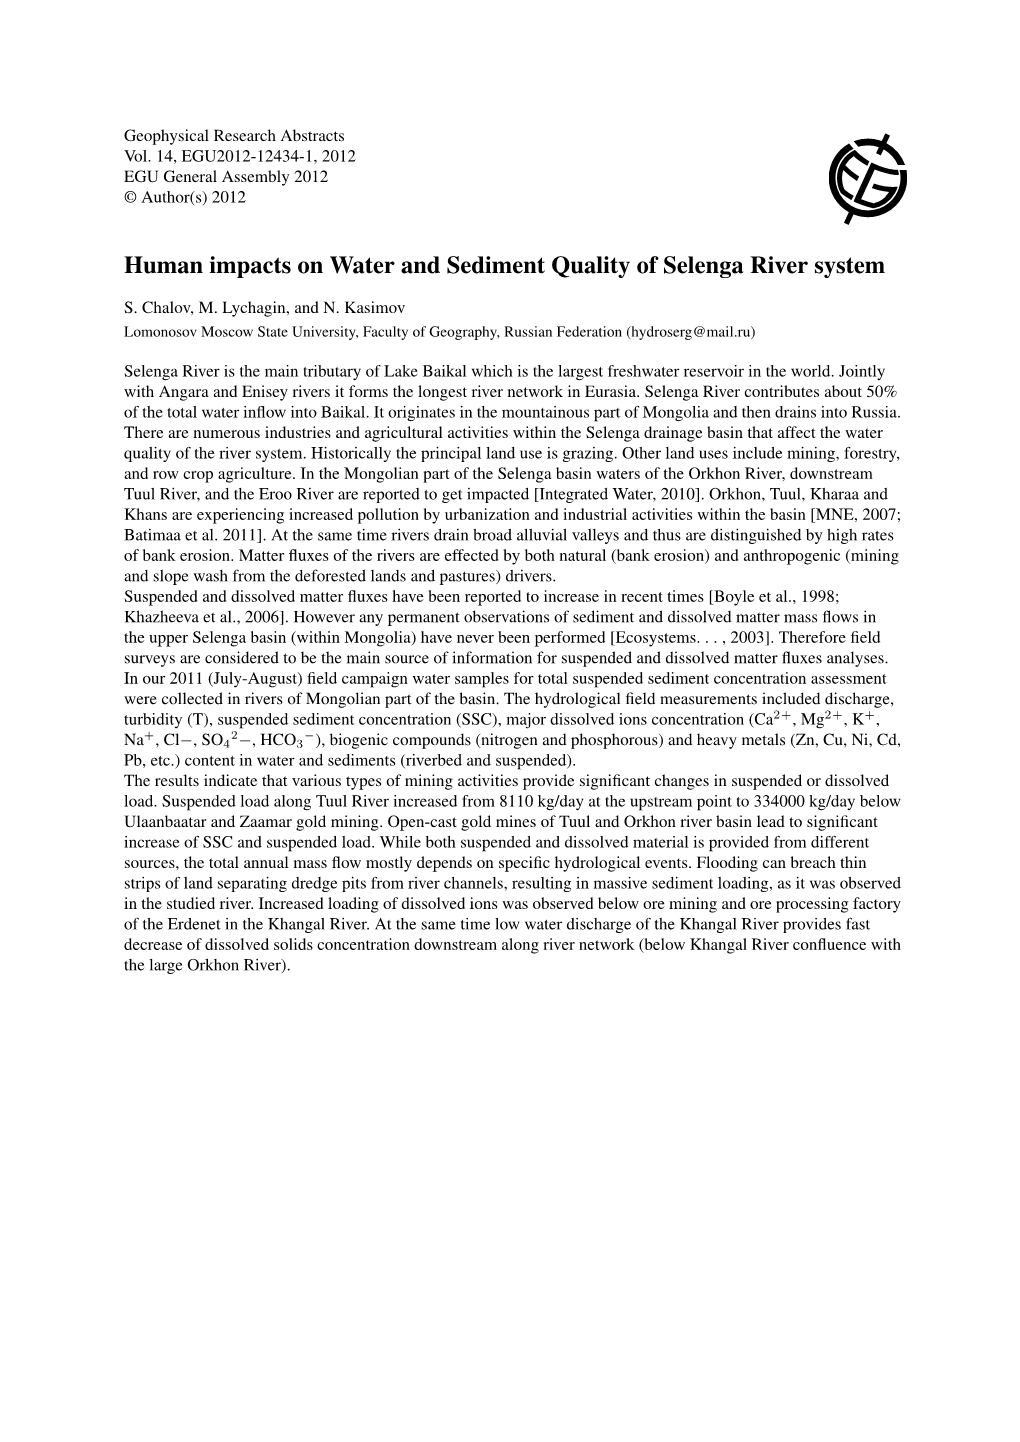 Human Impacts on Water and Sediment Quality of Selenga River System